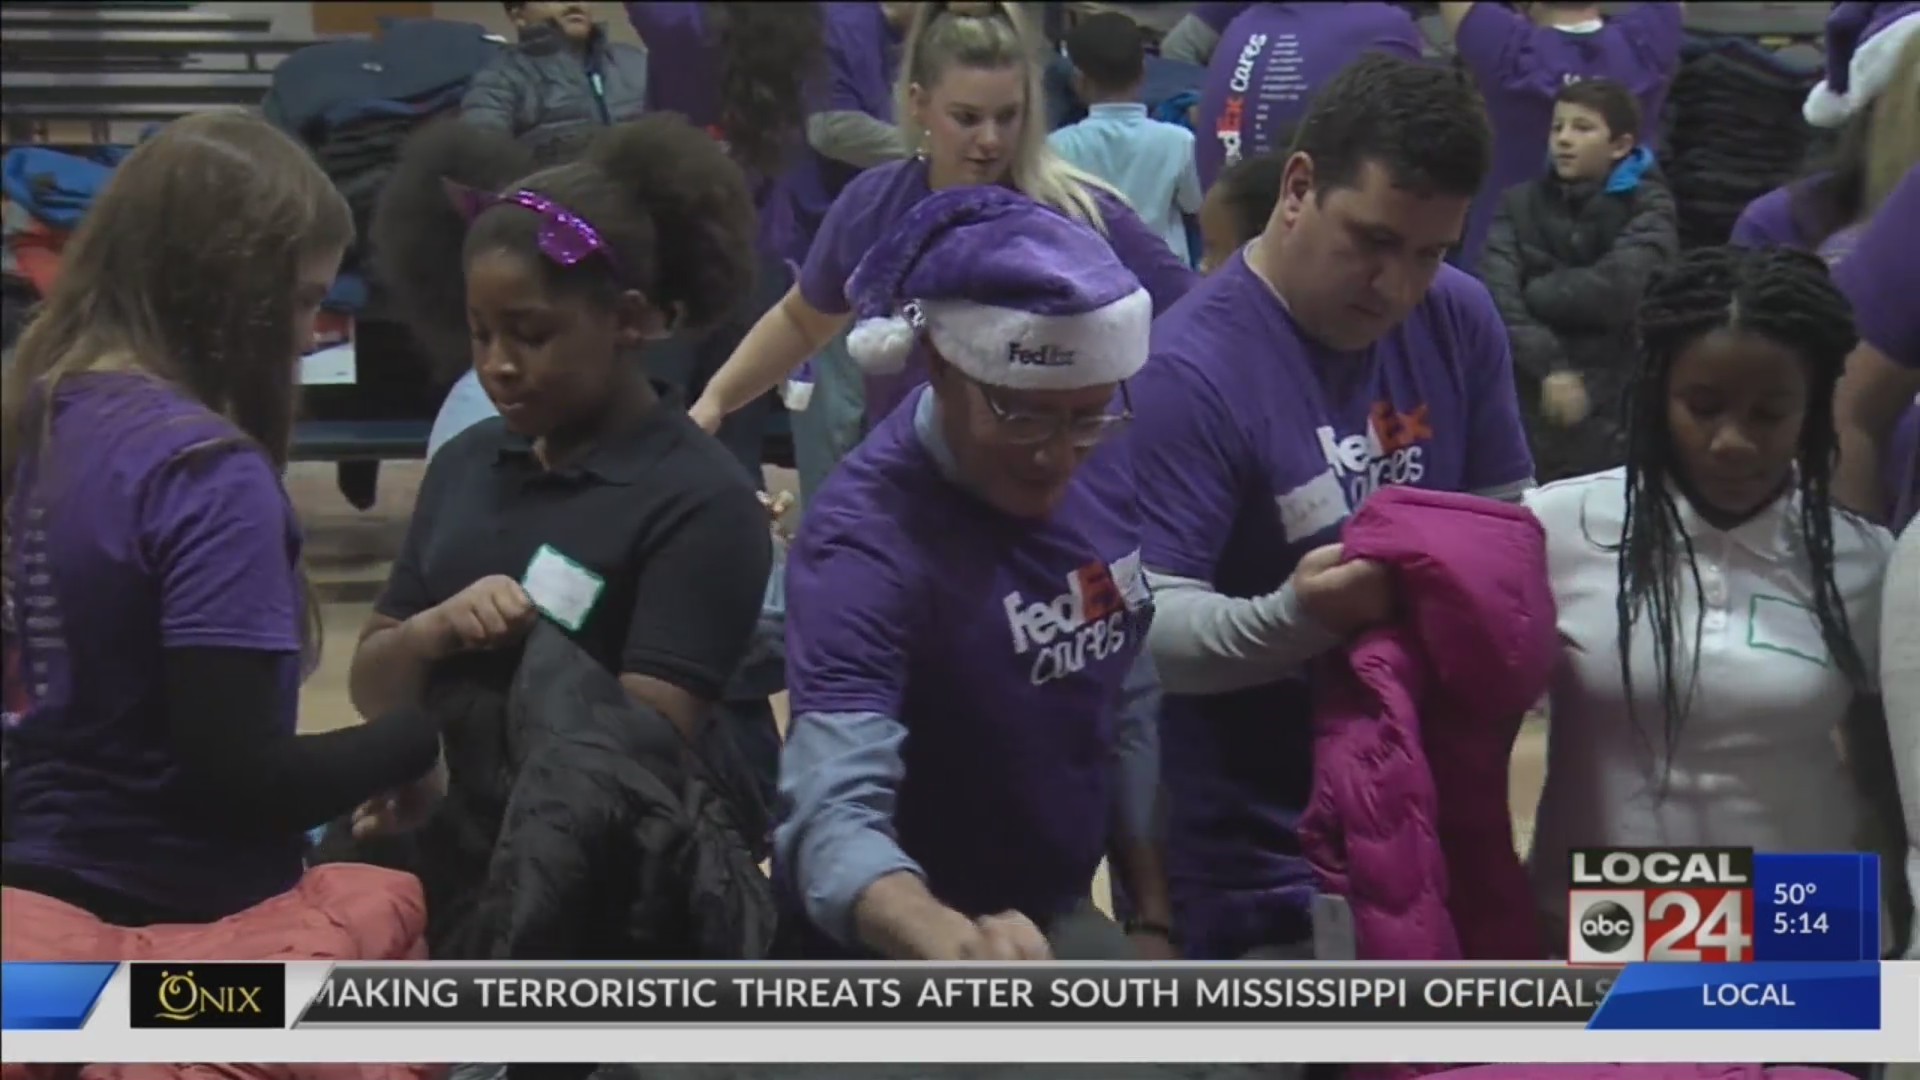 Bruce Elementary students get new winter coats thanks to "Operation Warm" & FedEx